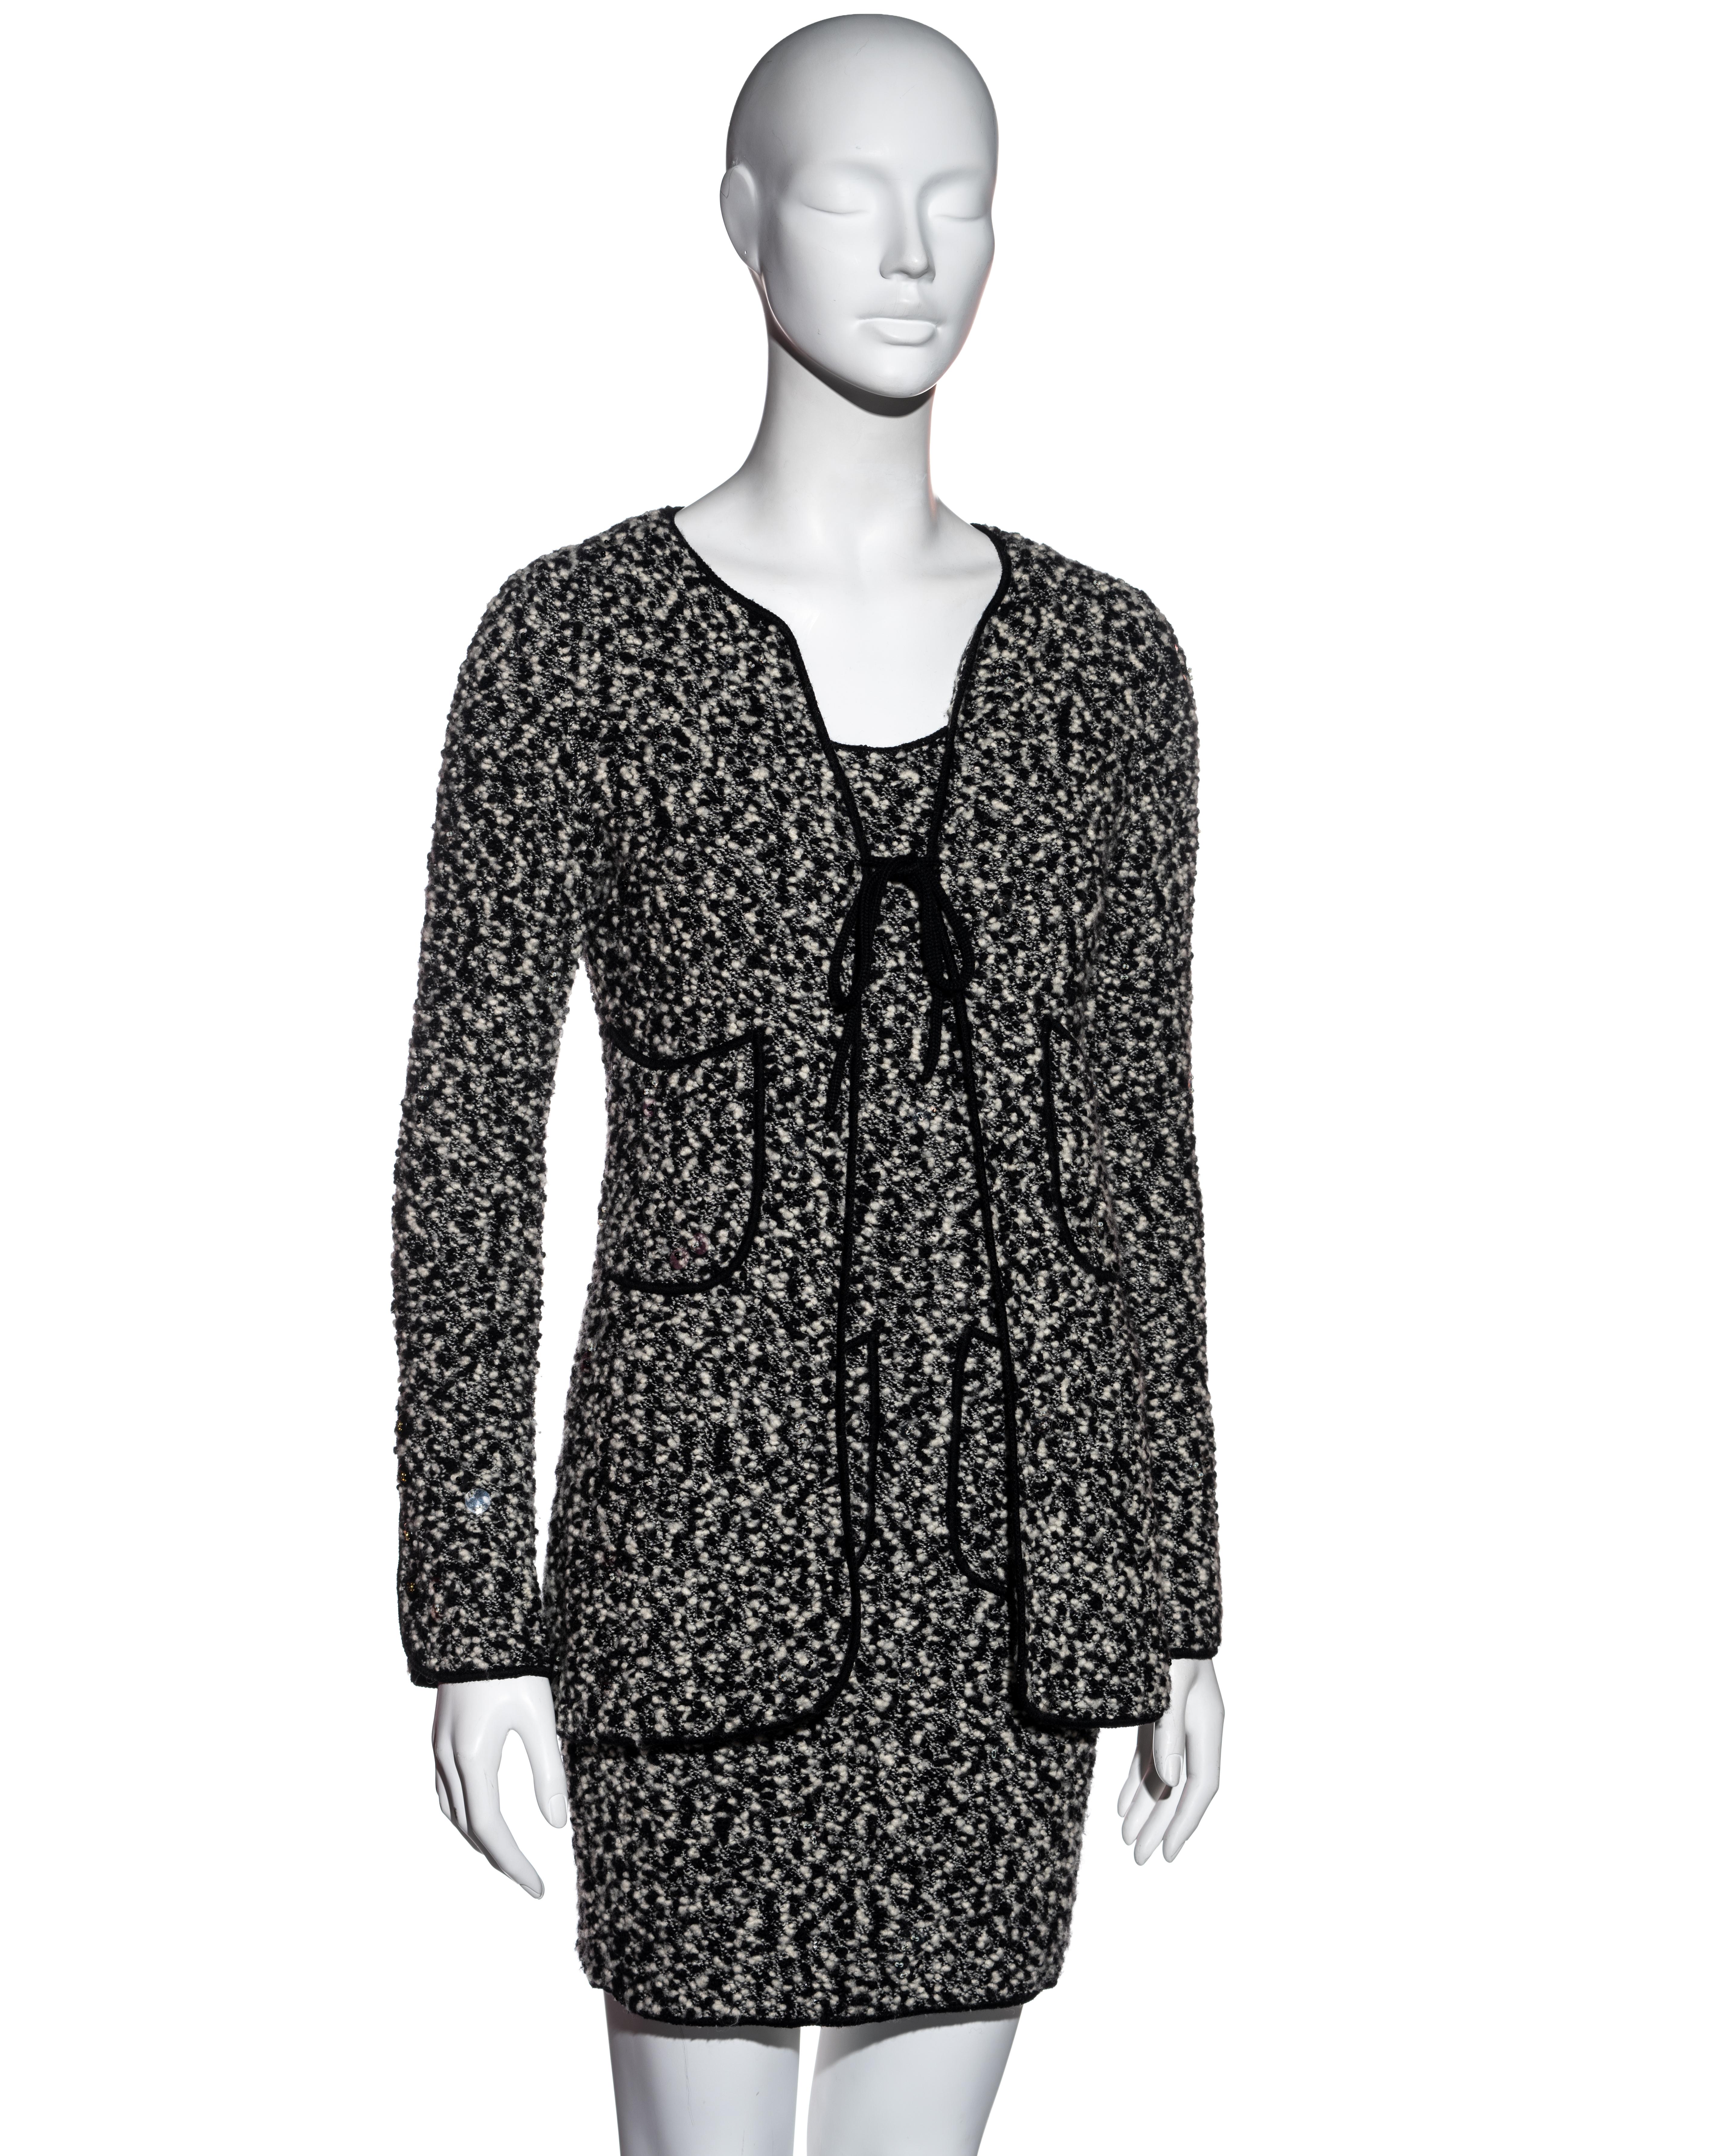 Women's Chanel by Karl Lagerfeld bouclé wool mini dress and cardigan set, fw 1994 For Sale